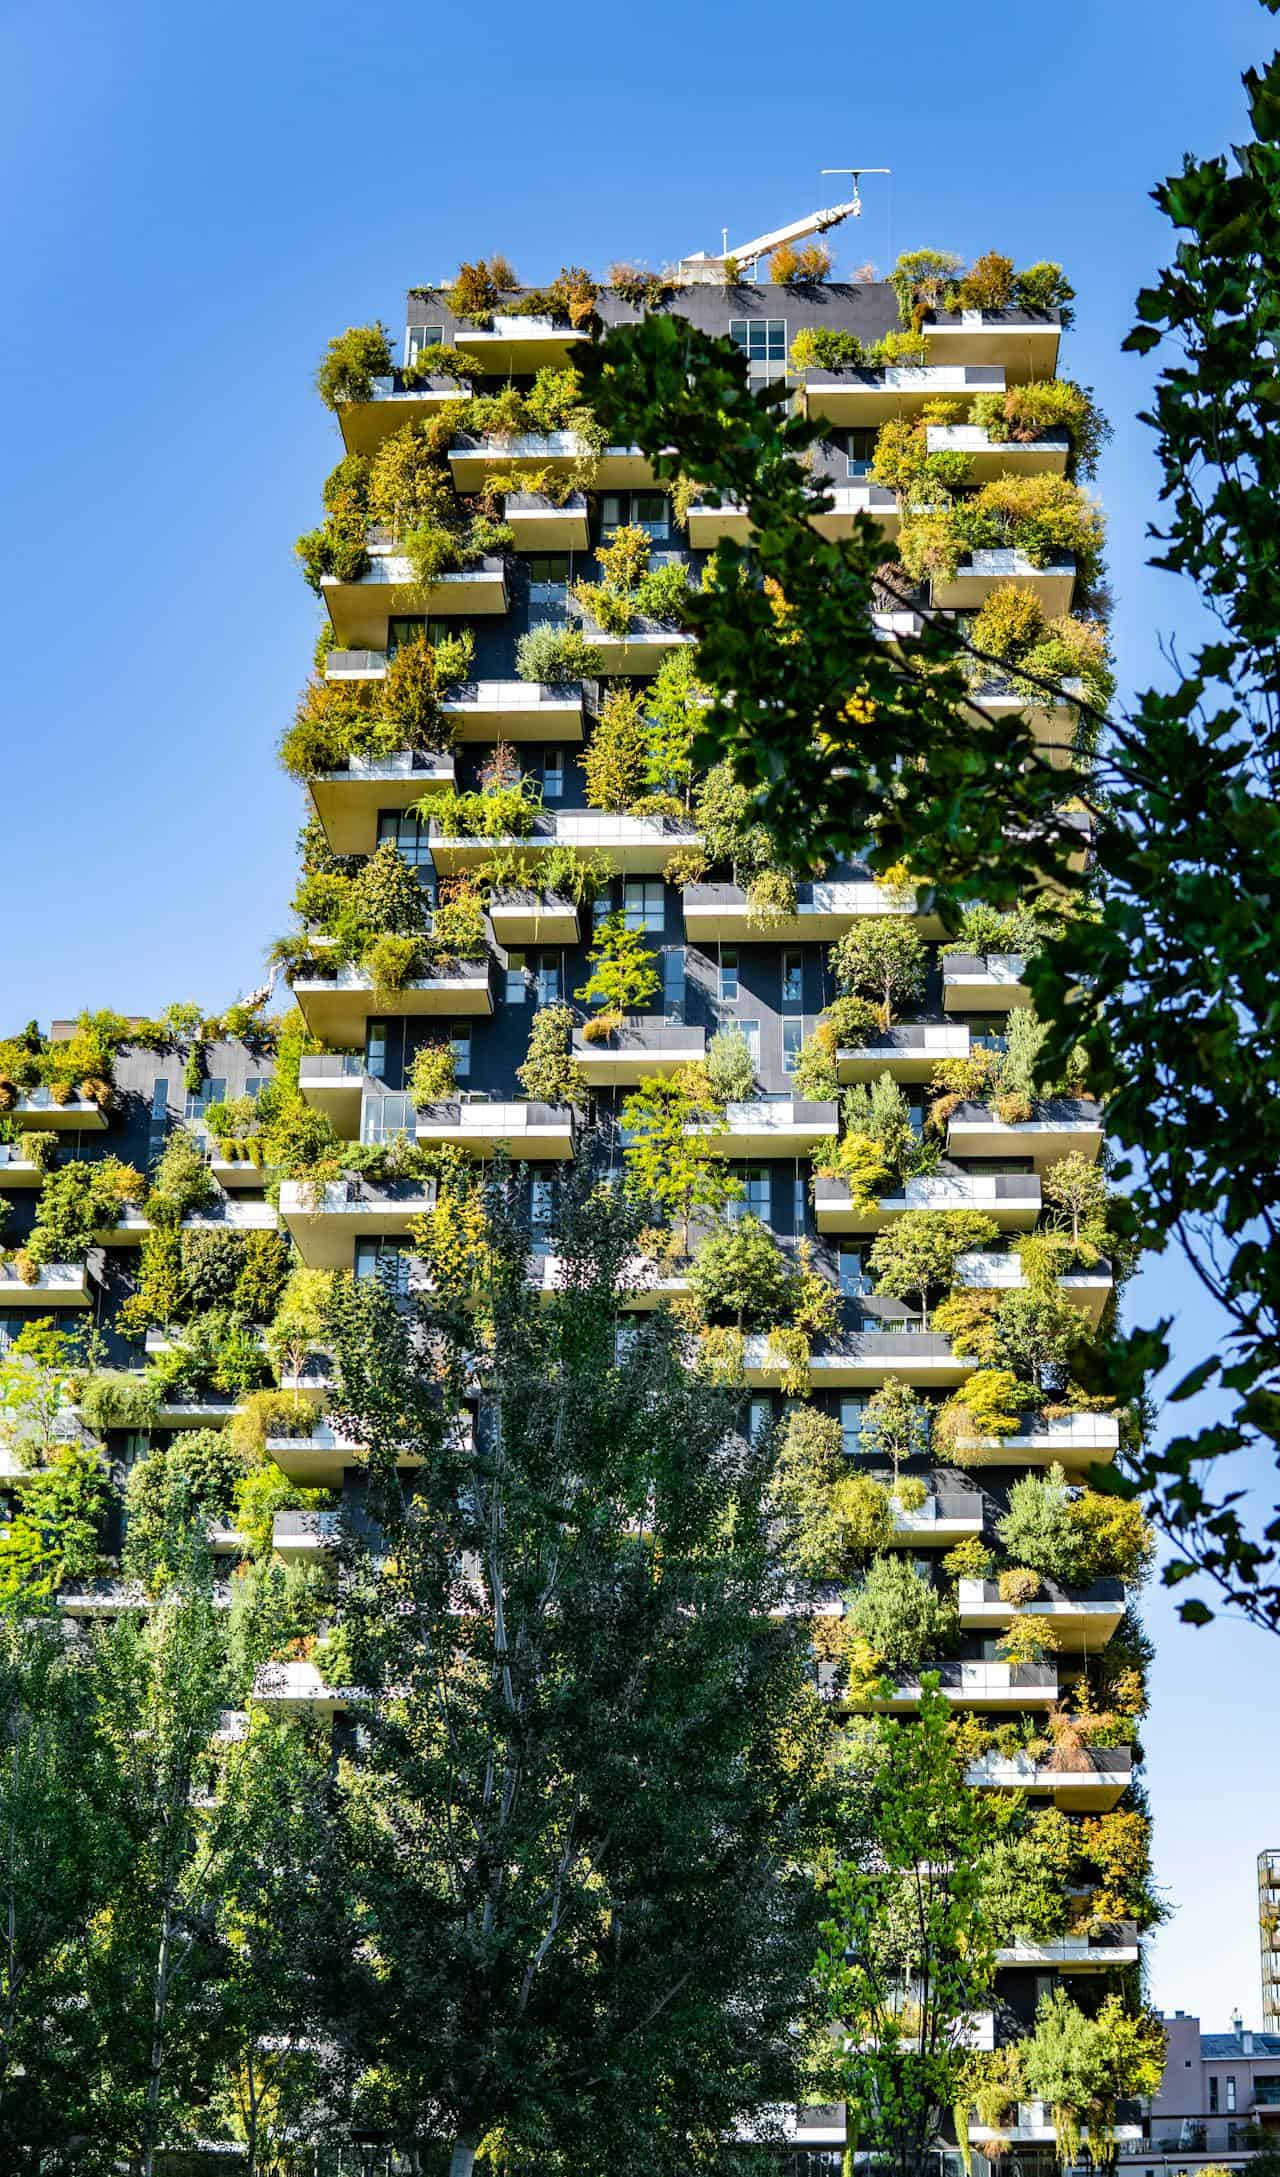 Vertical Forests